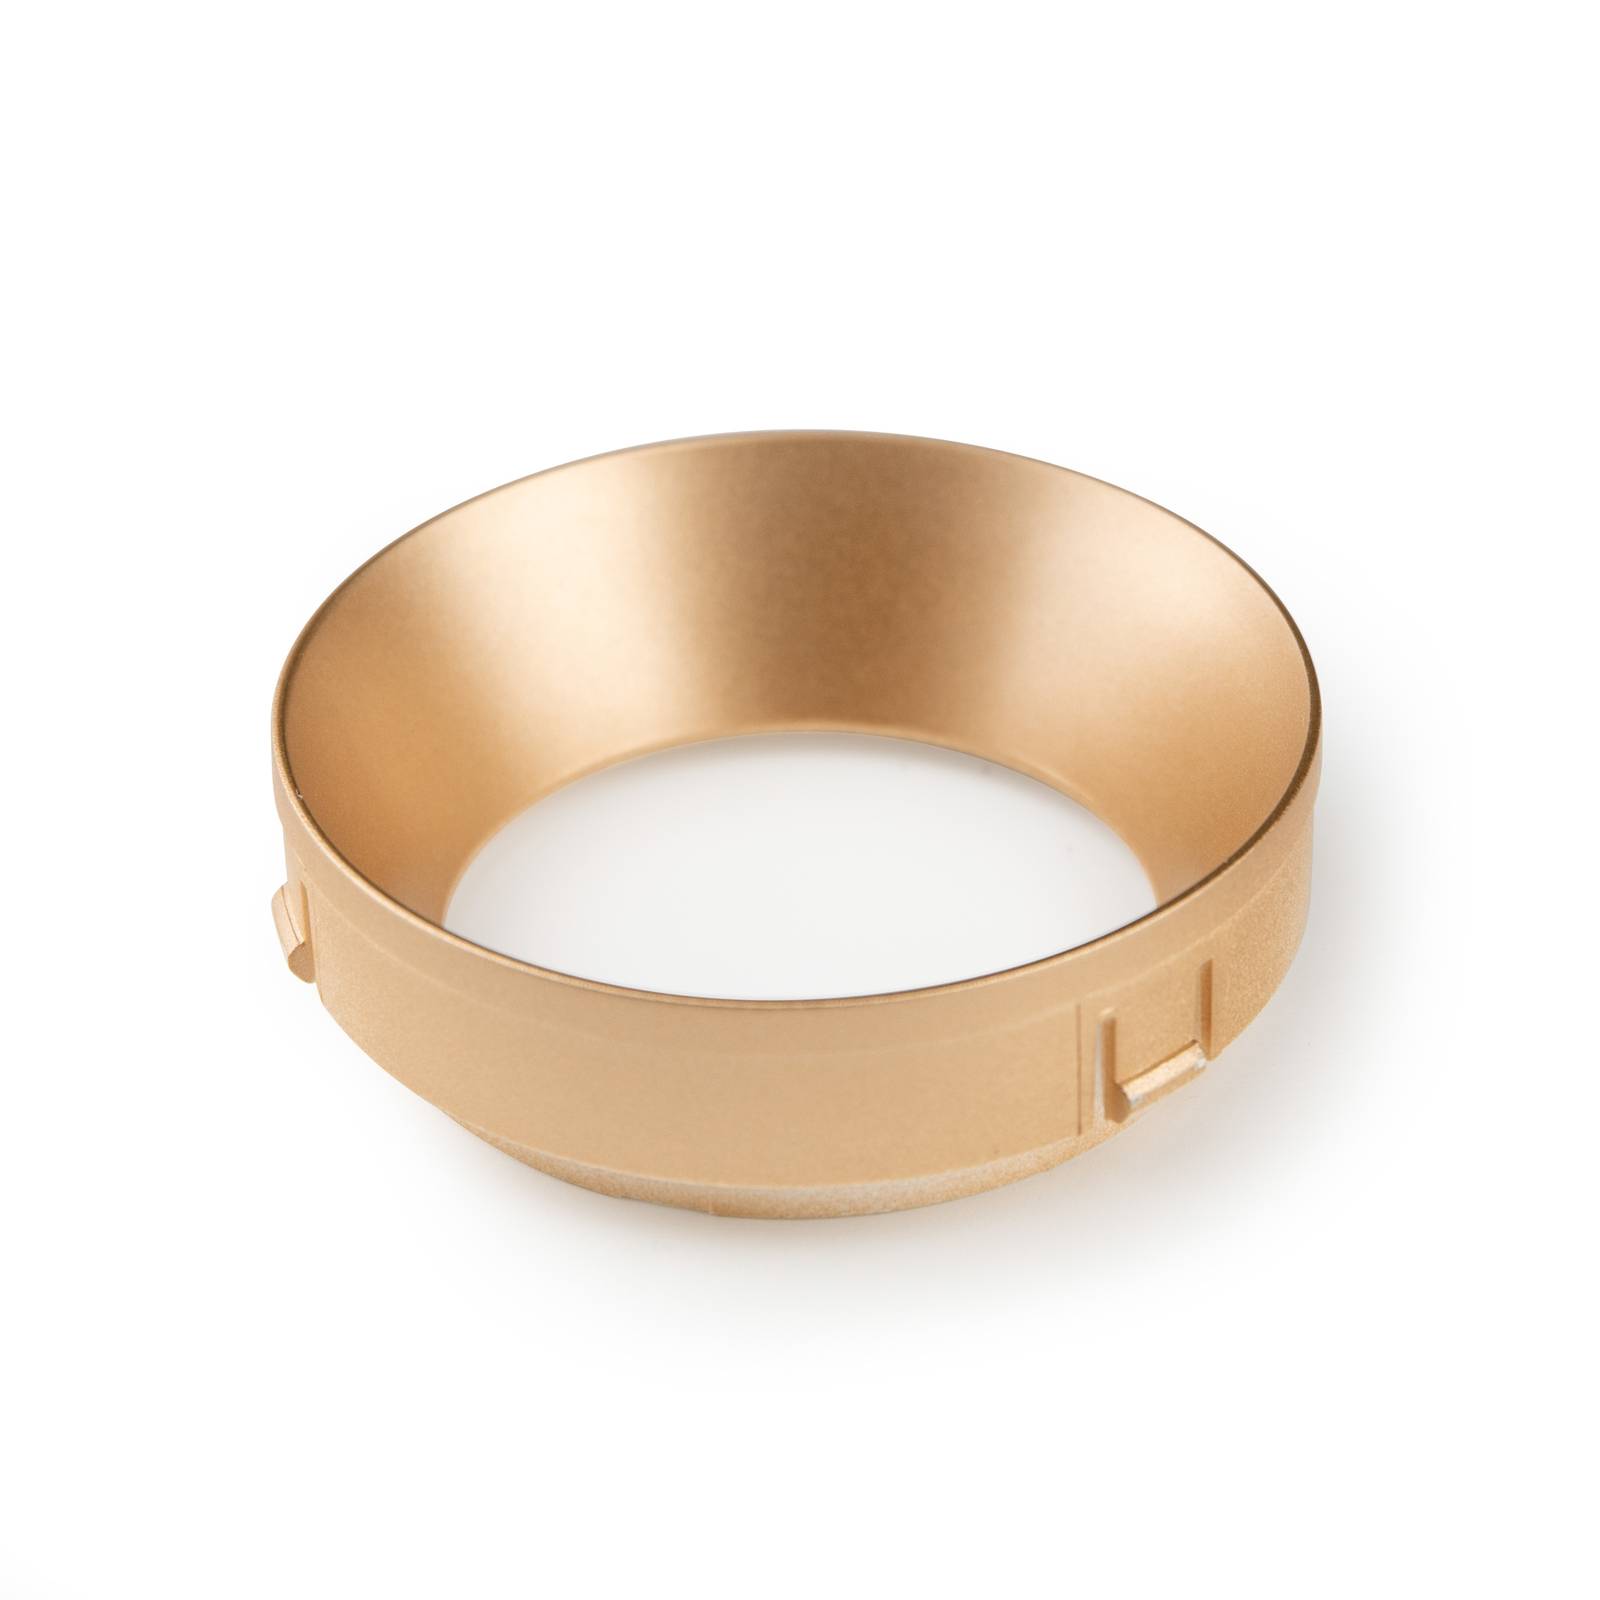 The Light Group SLC Innenring für Downlight Cup, gold